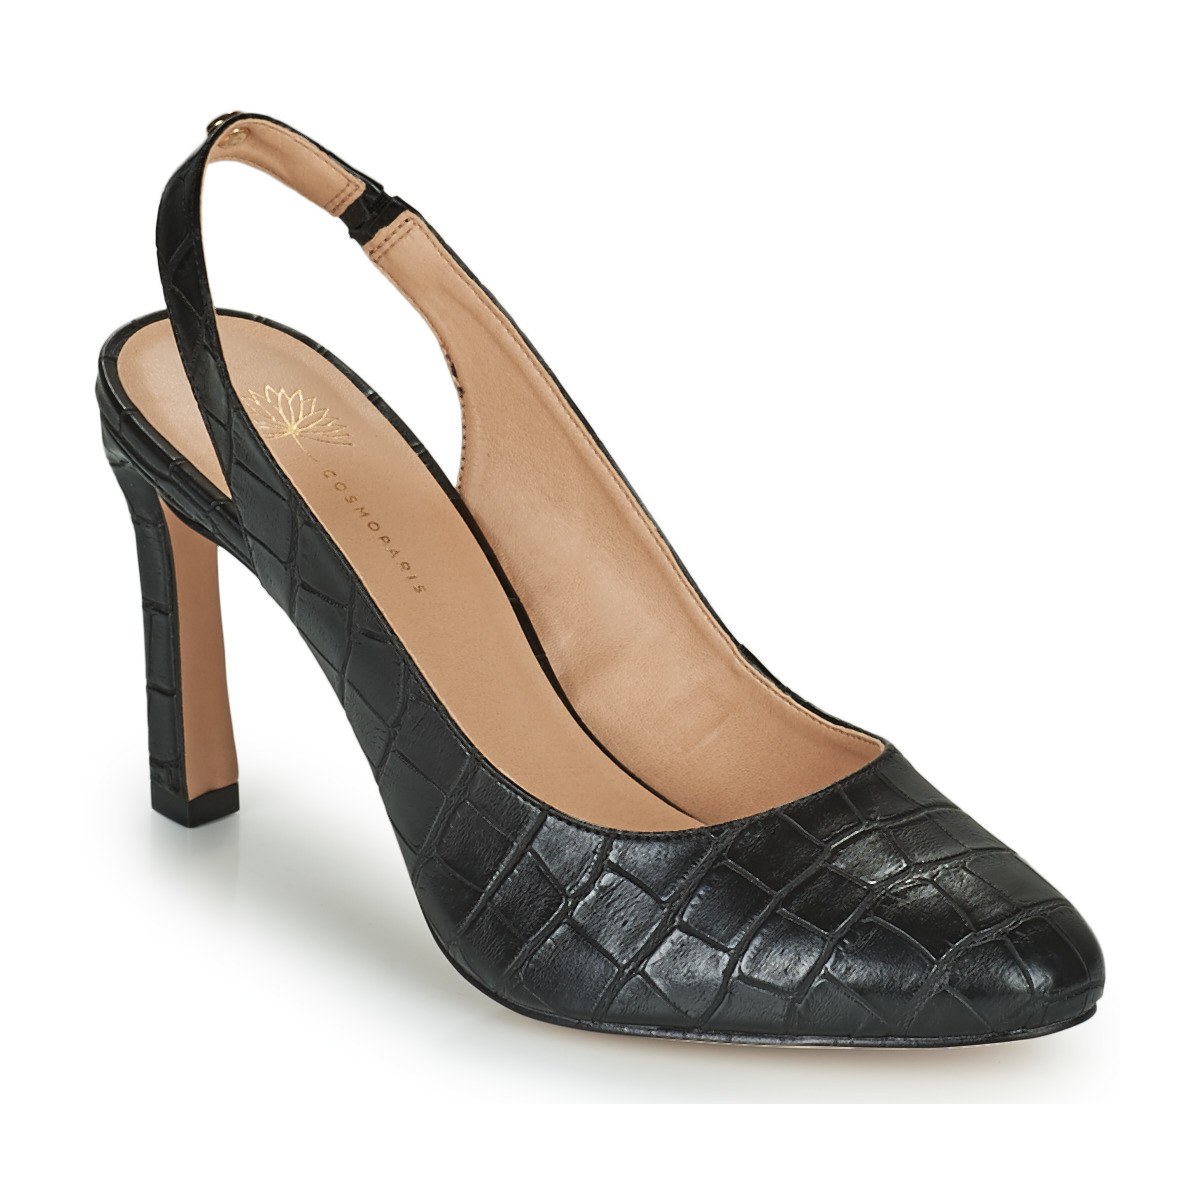 Cosmo Paris - Fast delivery Spartoo Europe ! - Shoes Court-shoes Women 114,40 €